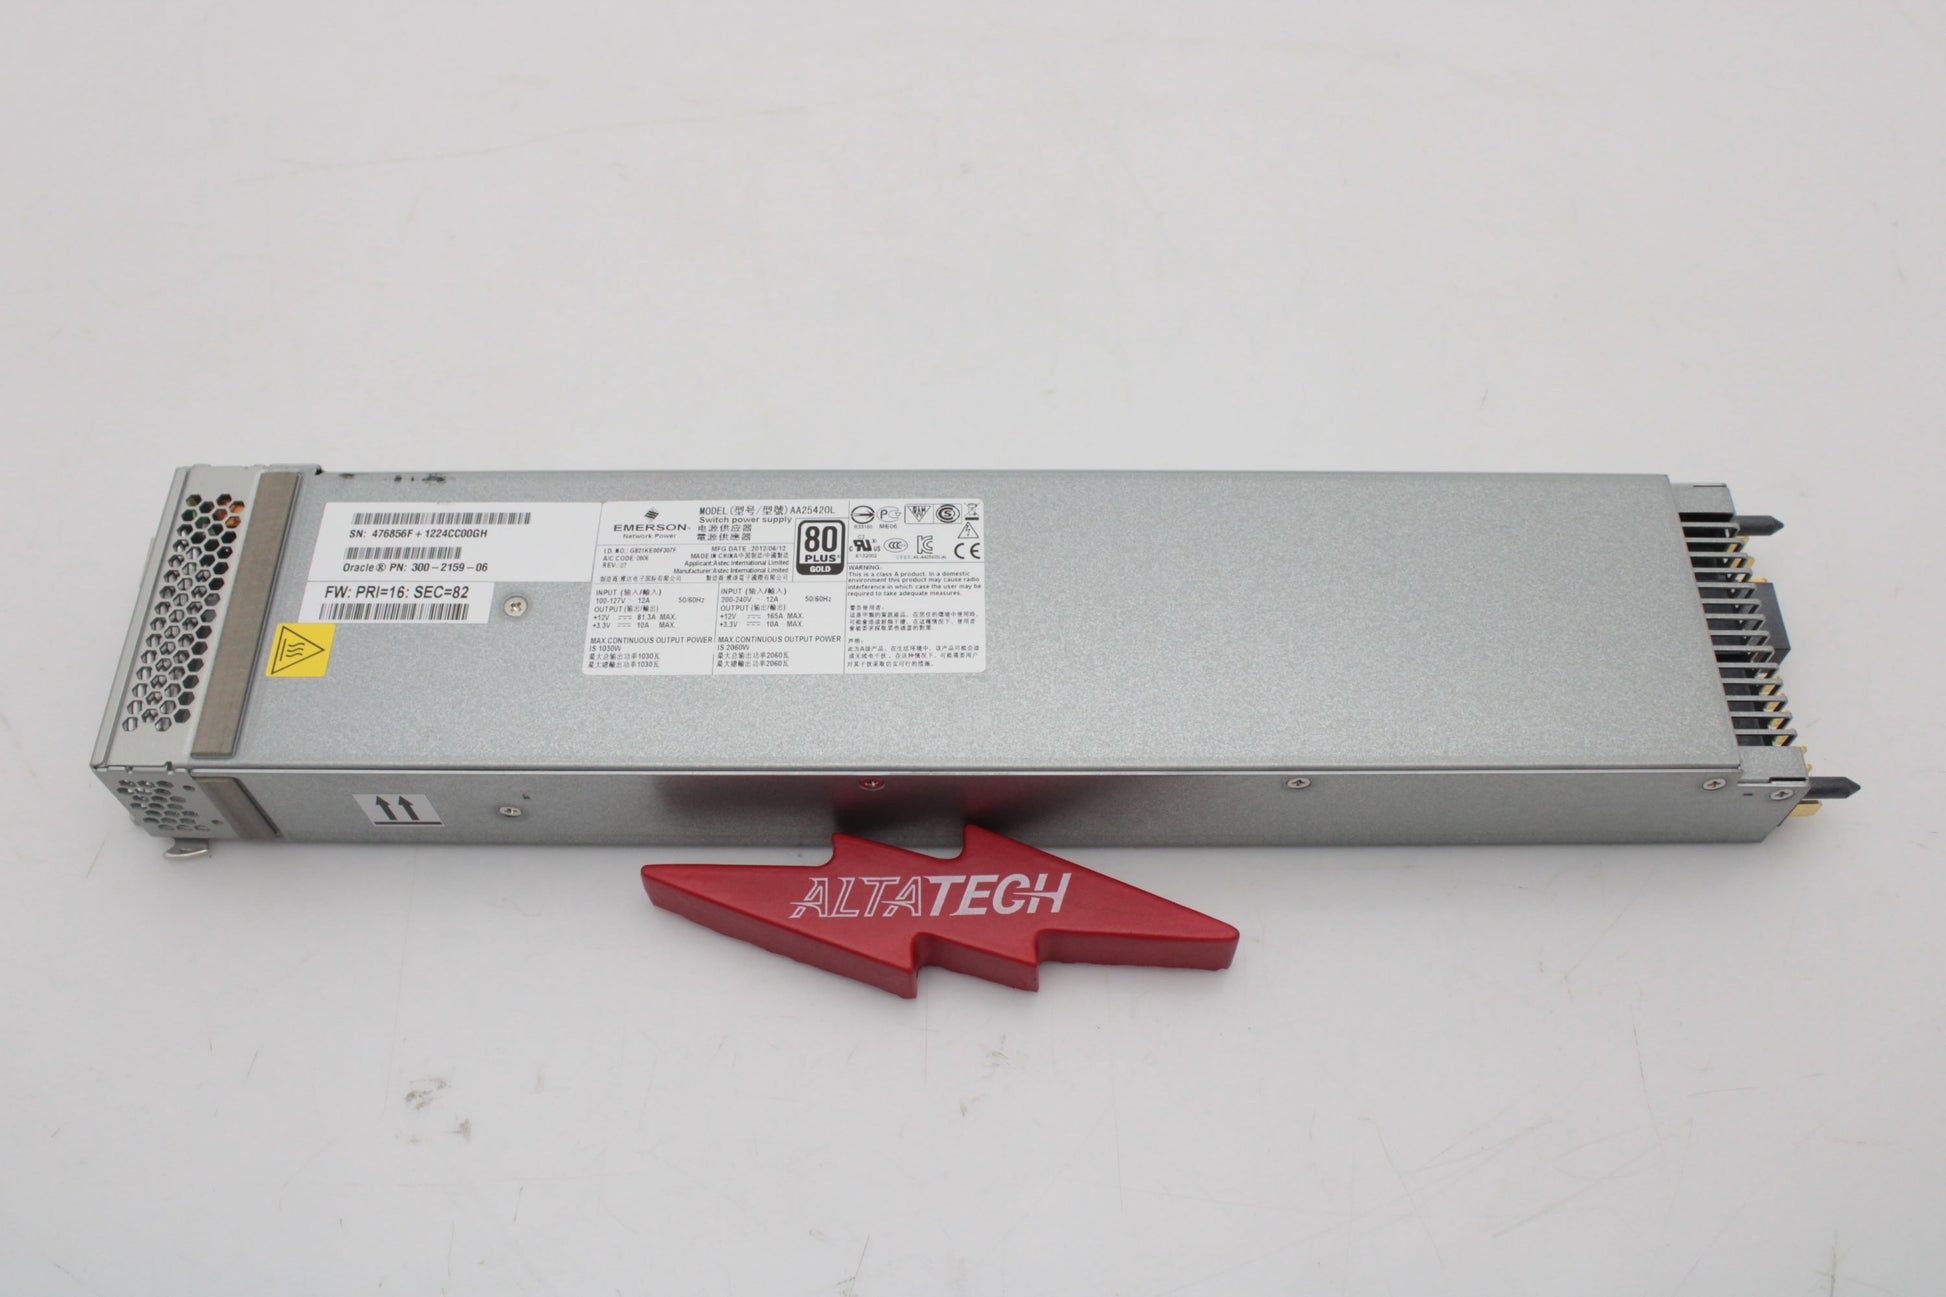 Oracle 300-2159 A239 1030/2060W AC Power Supply, Used